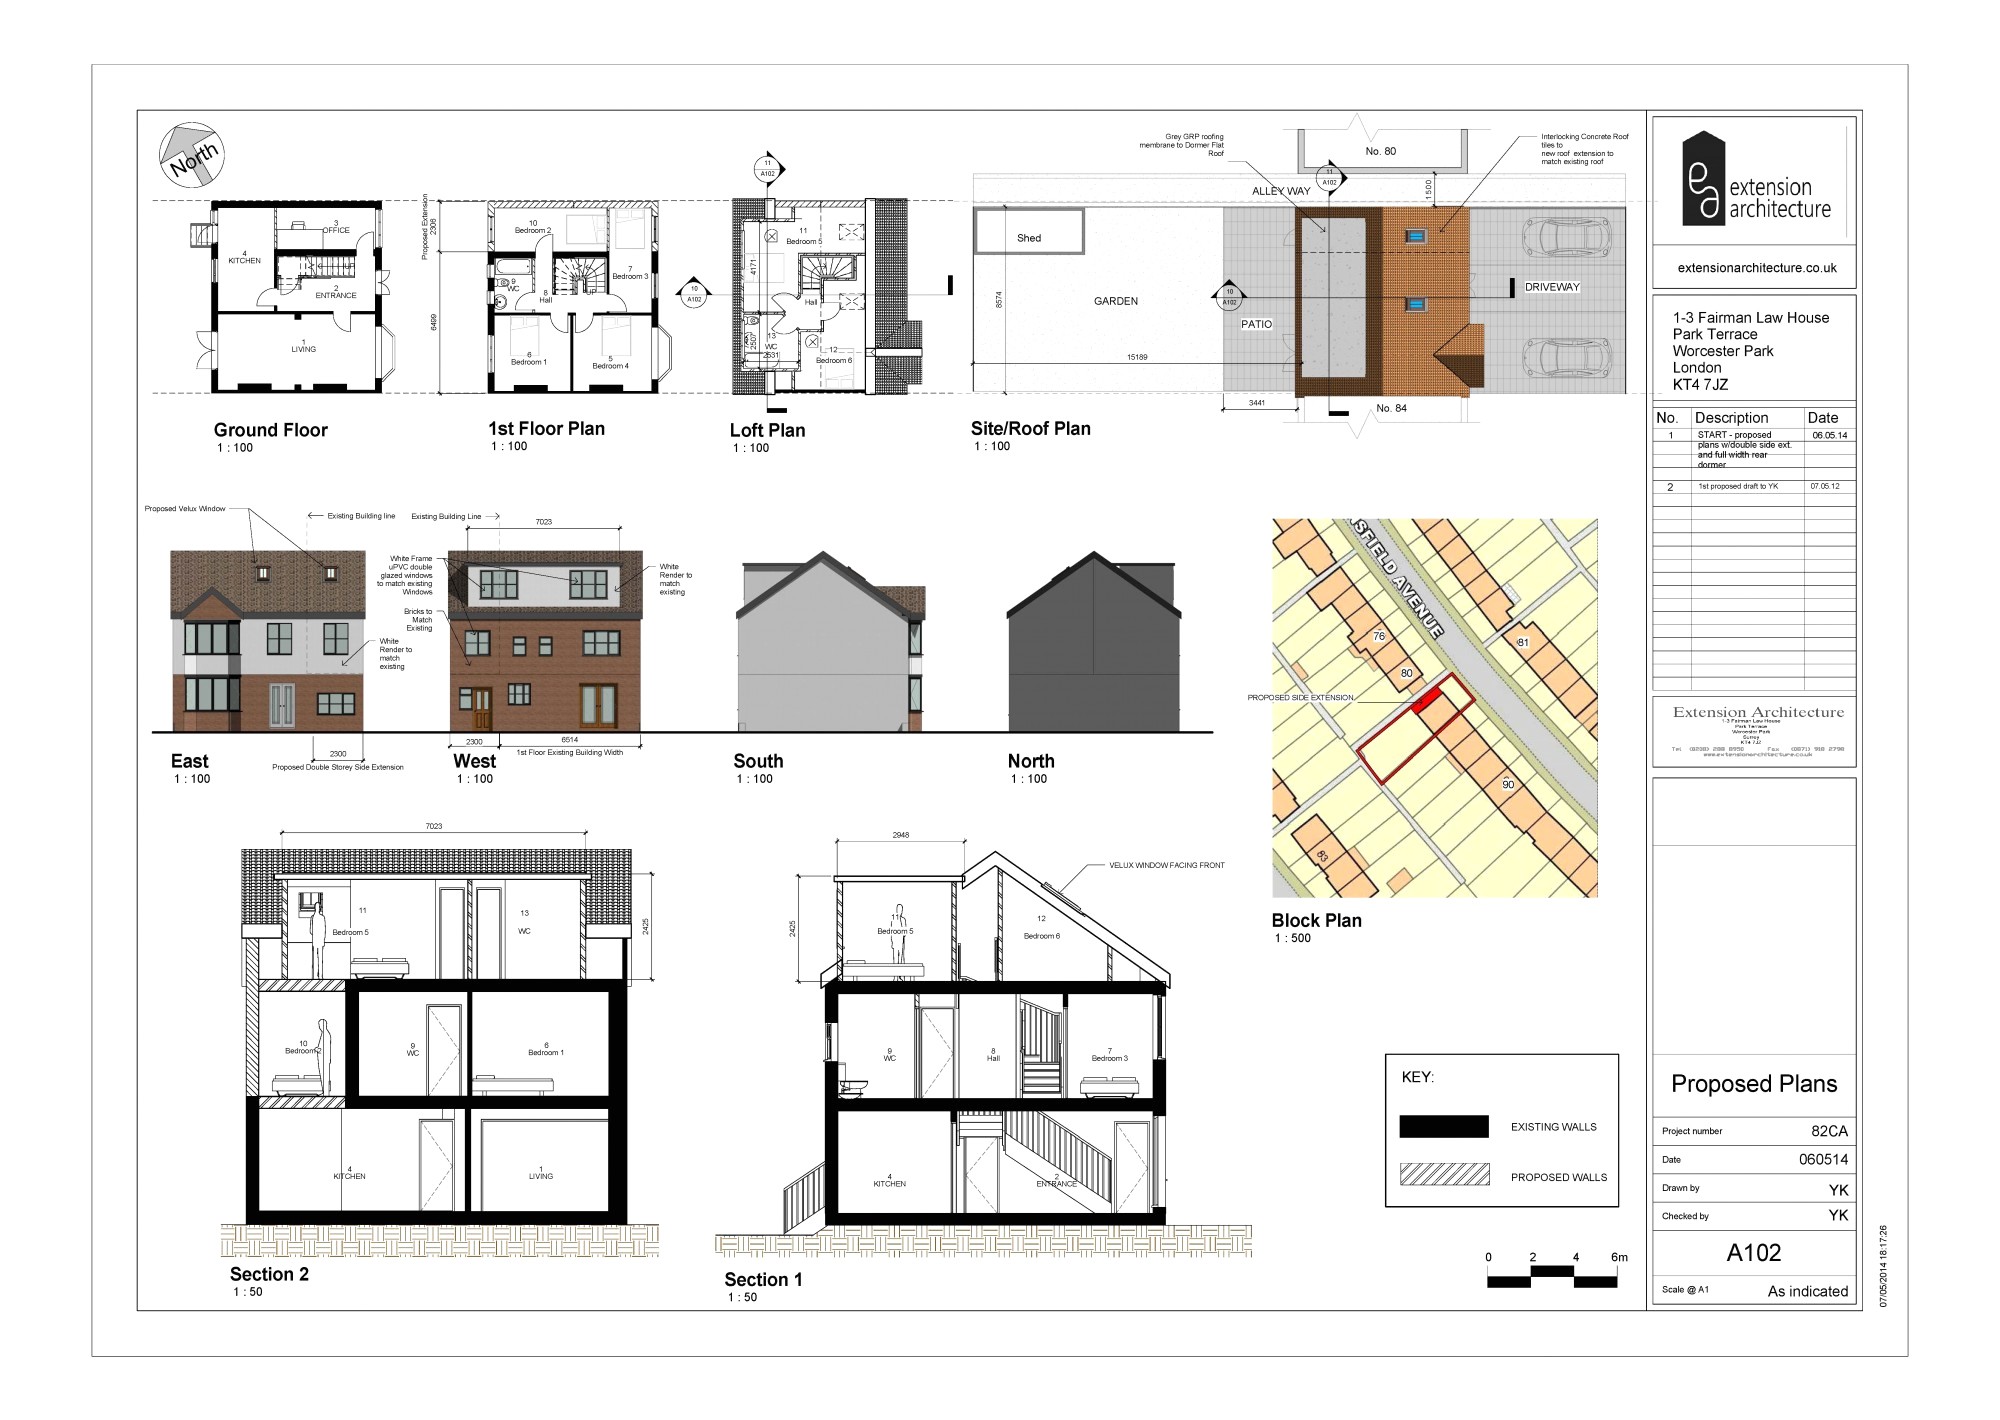 home extension planning permission best of extension built without planning permission has put home into